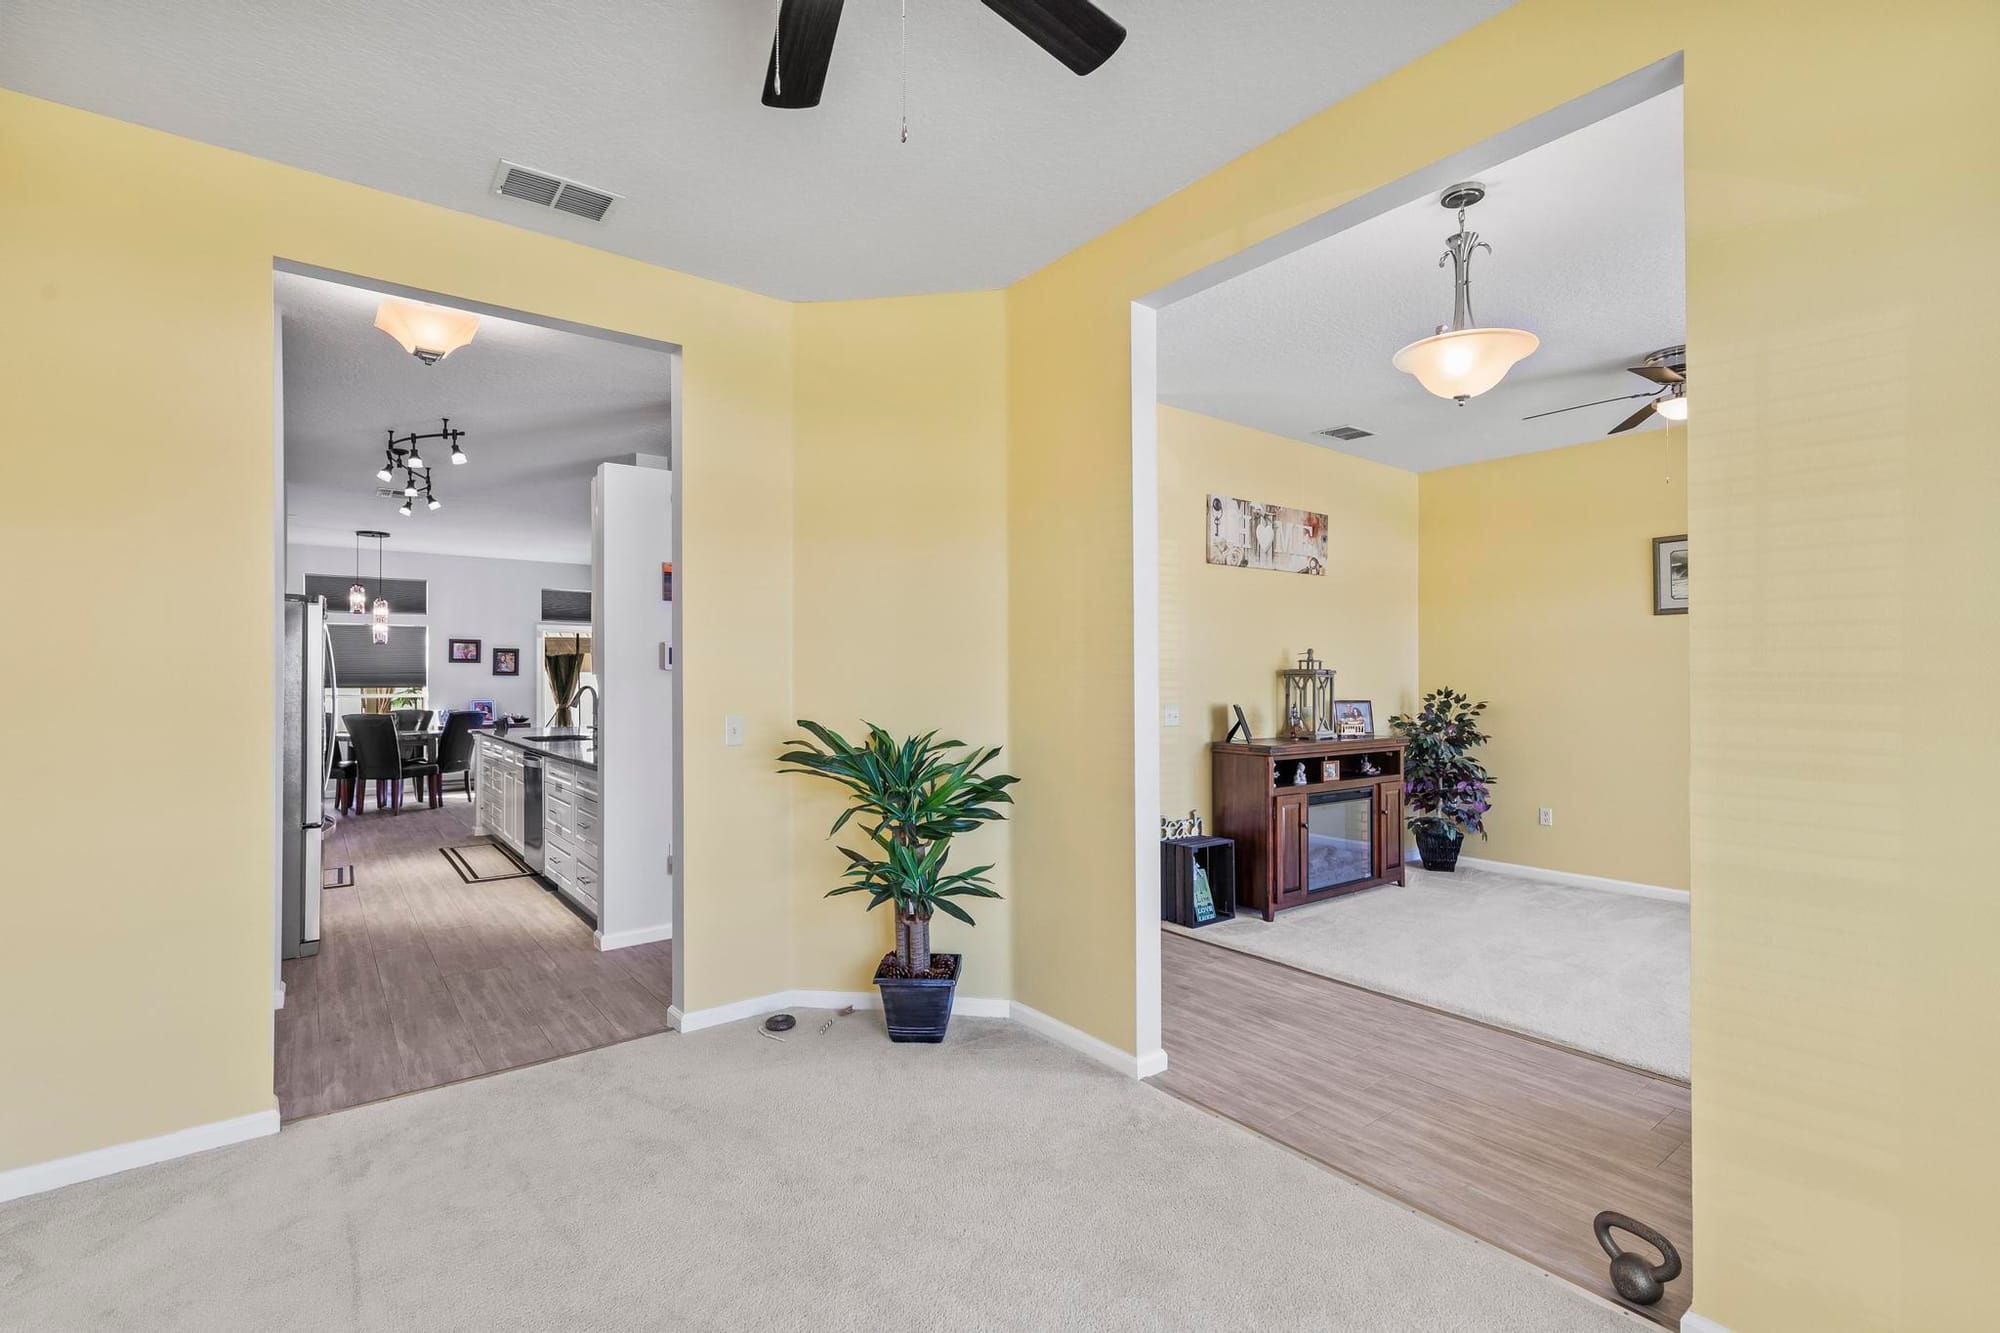 Virtual Open House Feature: Turn-Key Luxury Oasis - 4-Bedroom Family Home in Palm Coast